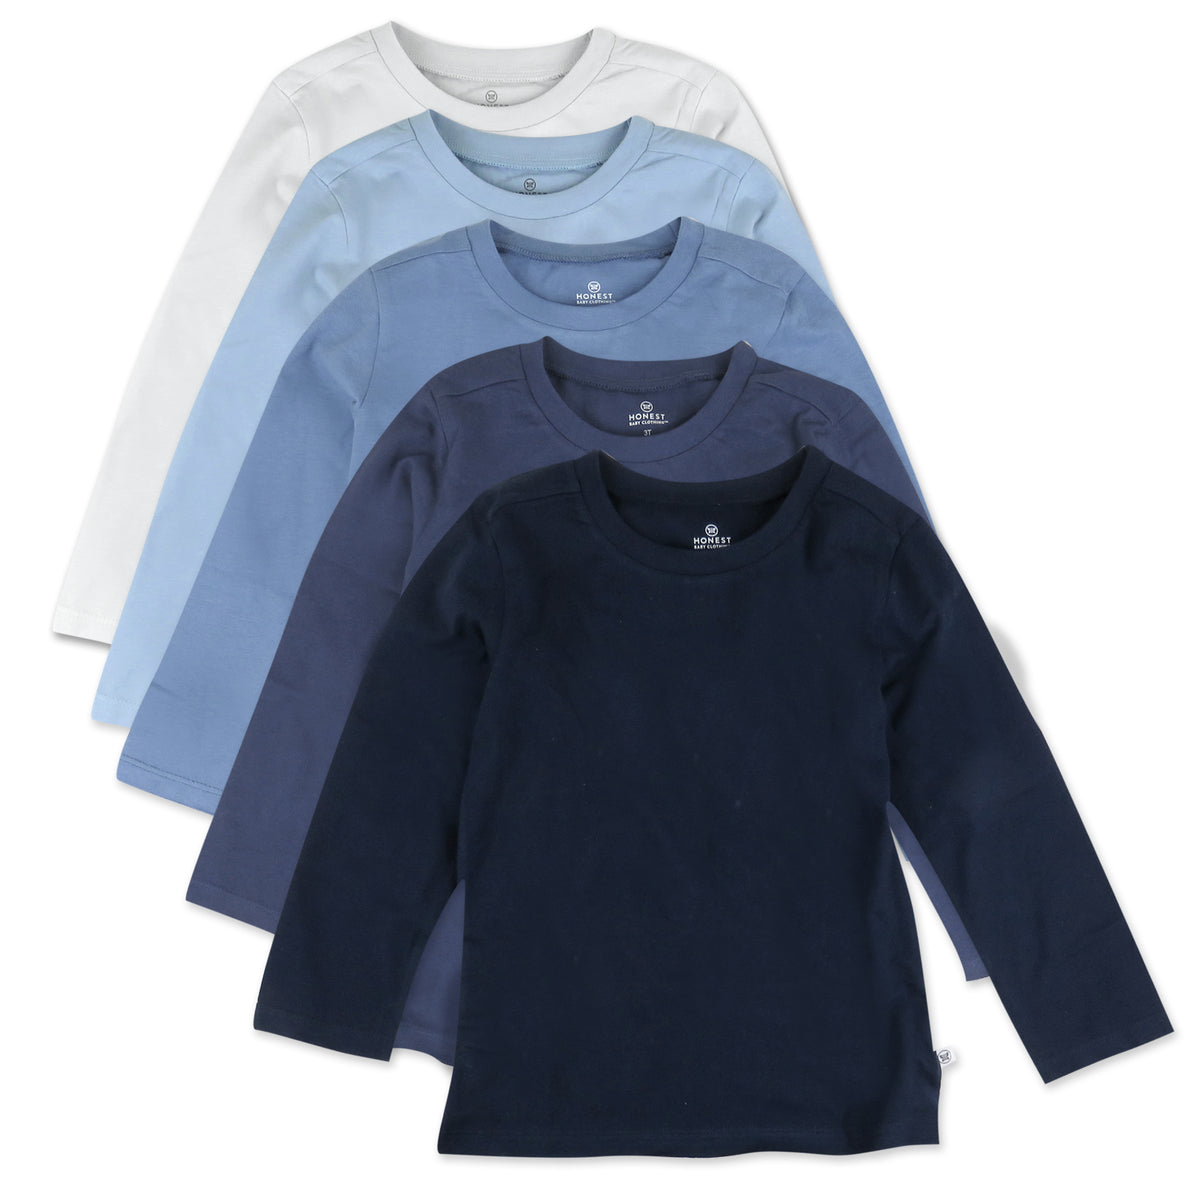 Essentials Boys' Long-Sleeve Knit Thermal T-Shirt, Pack of 3, Blue  Camo/Ivory/Navy, X-Large